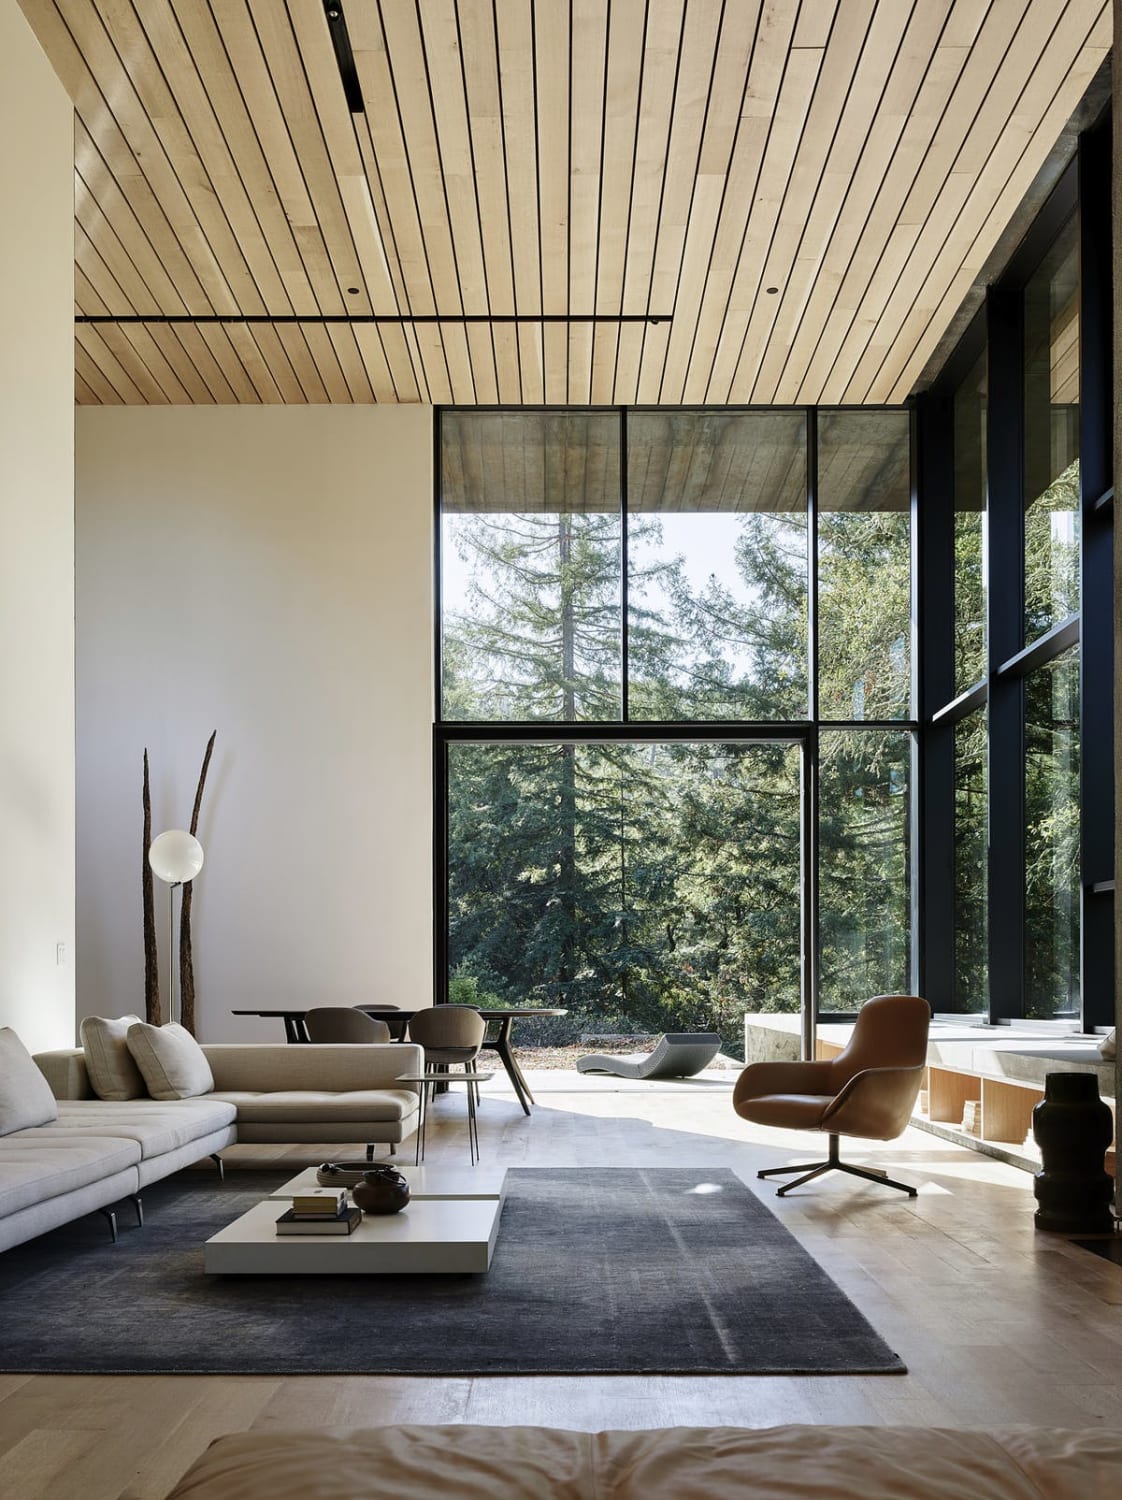 10 new living room designs for your Friday inspiration